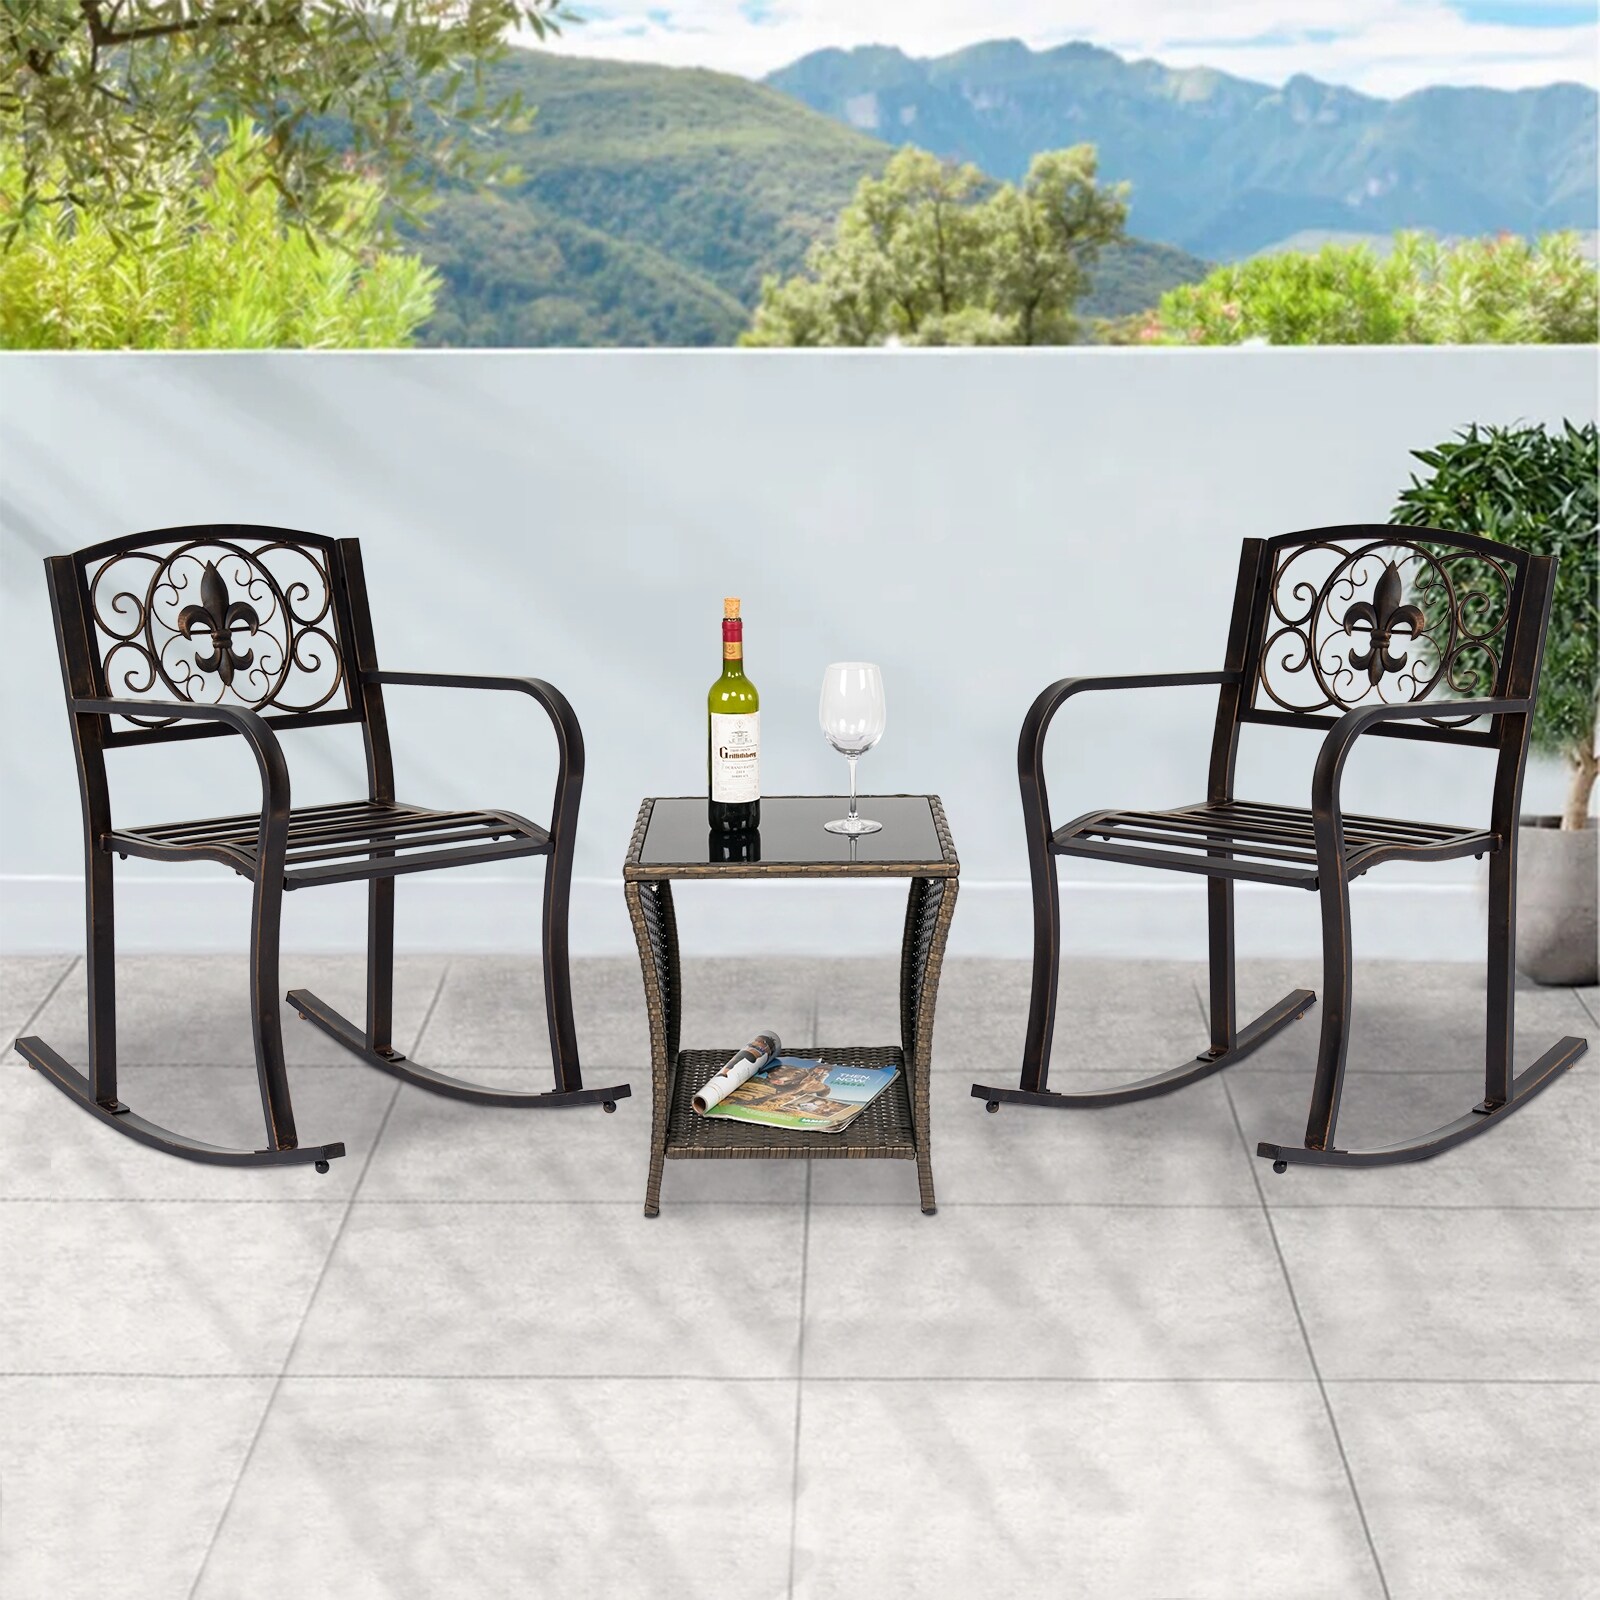 https://ak1.ostkcdn.com/images/products/is/images/direct/4346c32623a6f18d1826fdd09ba3ad98c35eb366/Kinsunny-2-Piece-Outdoor-Metal-Rocking-Chair-Patio-Rocking-Bench-with-Cushion%2C-Single-Arm-Chair-w-Scroll-Design-for-Deck%2C-Garden.jpg